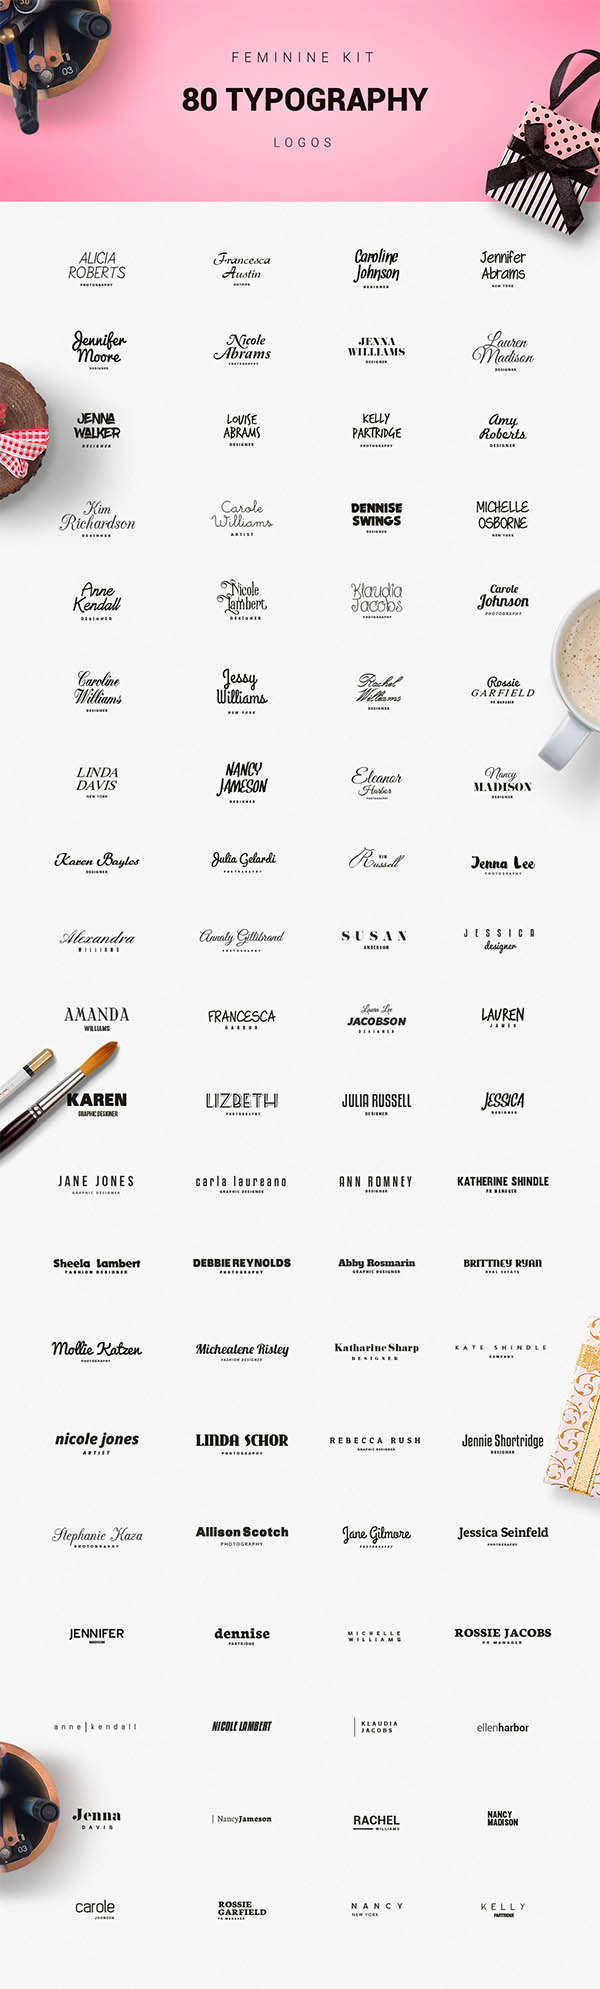 900+ Amazing Logos Bundle Available in .AI & .PSD - 15